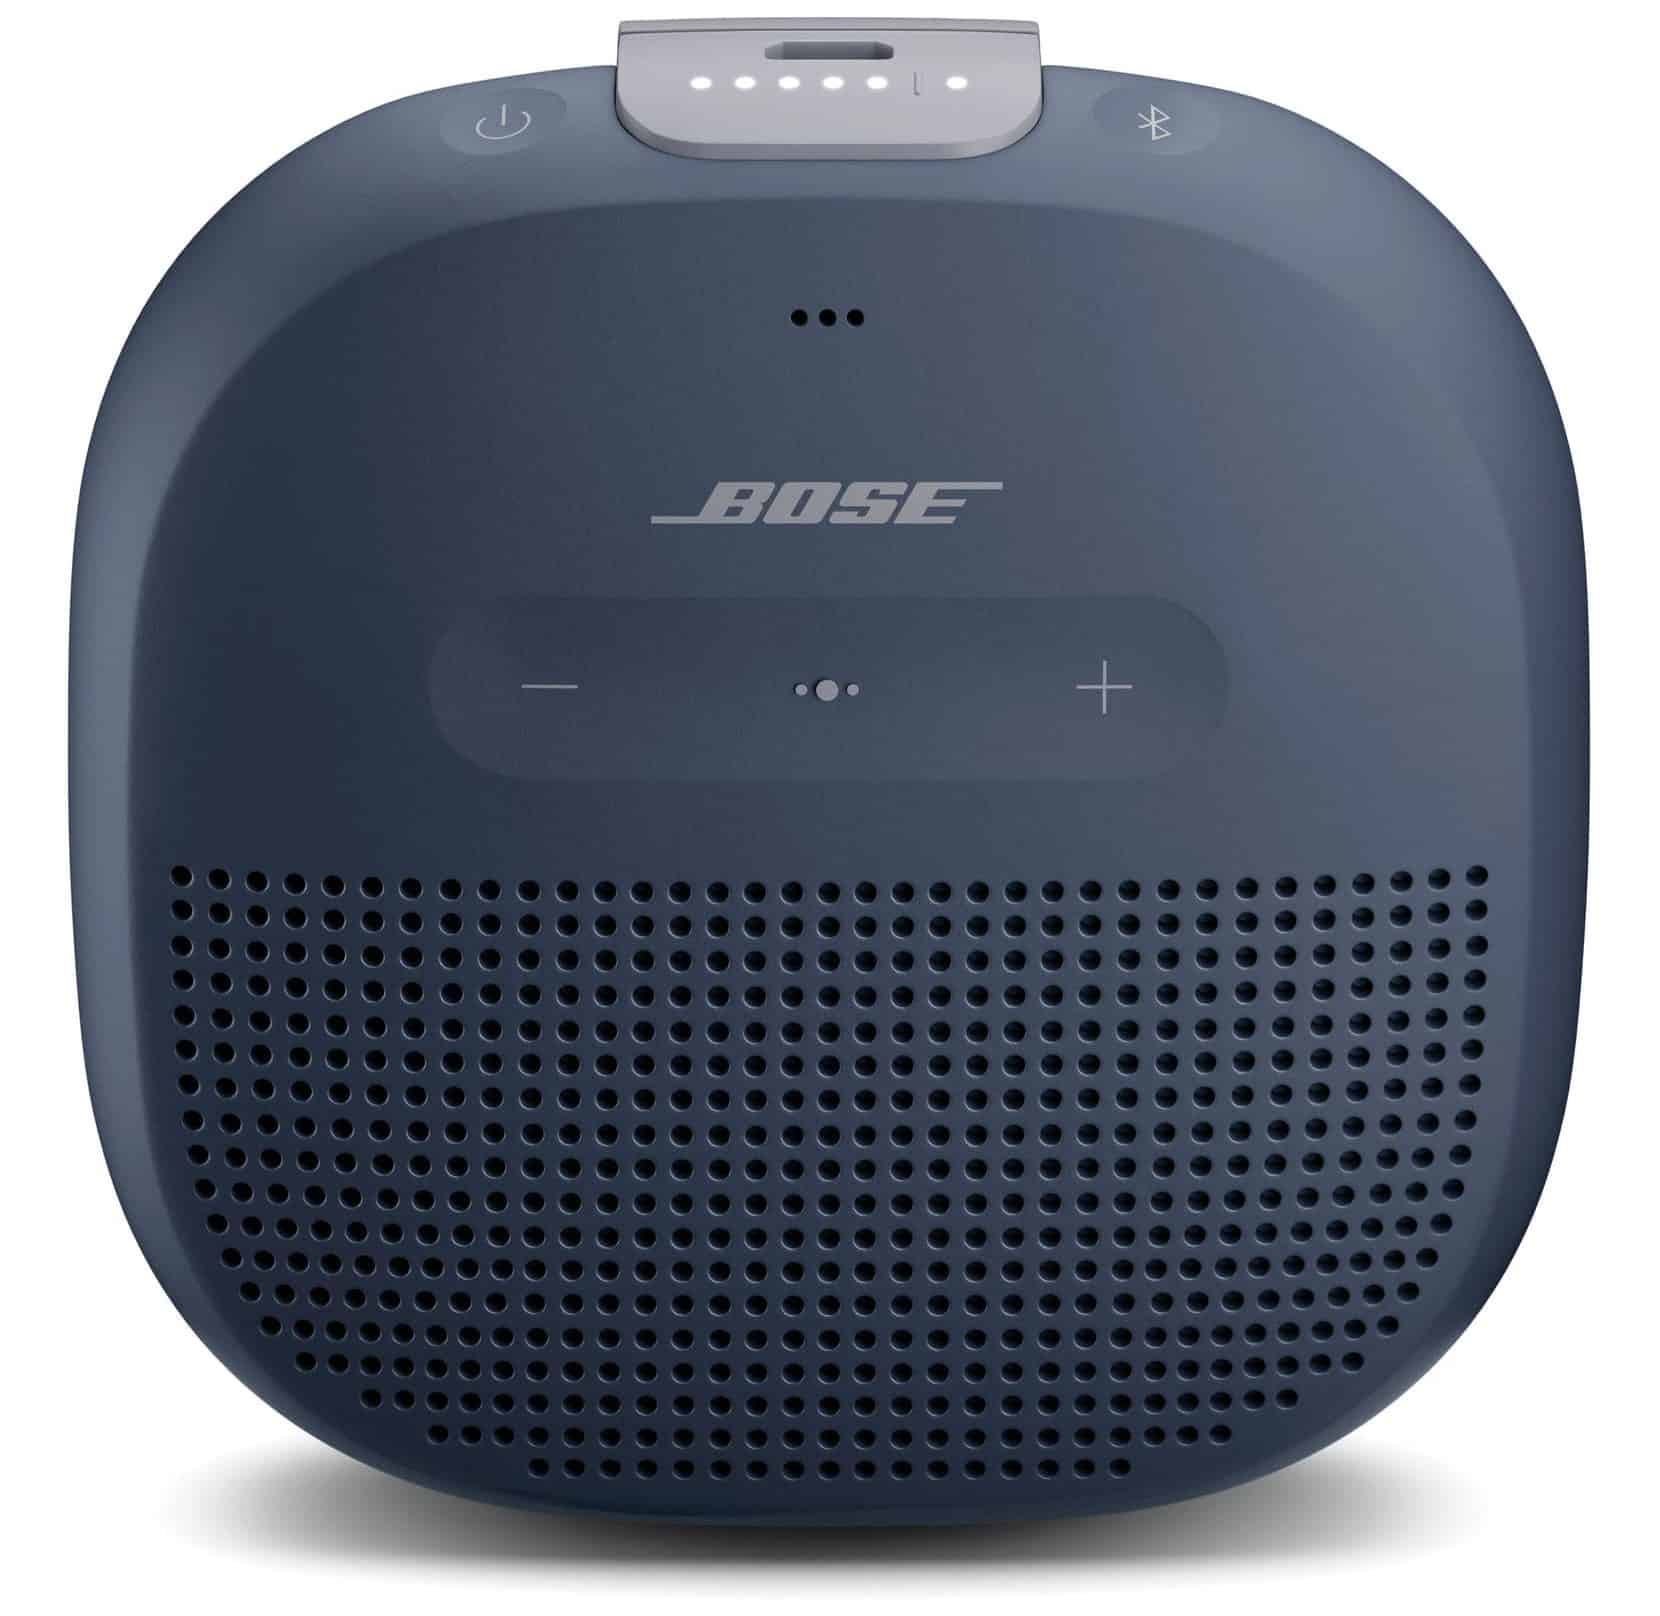 Best Gifts For Her 2022: Bose Bluetooth Wireless Speaker for Wife 2022